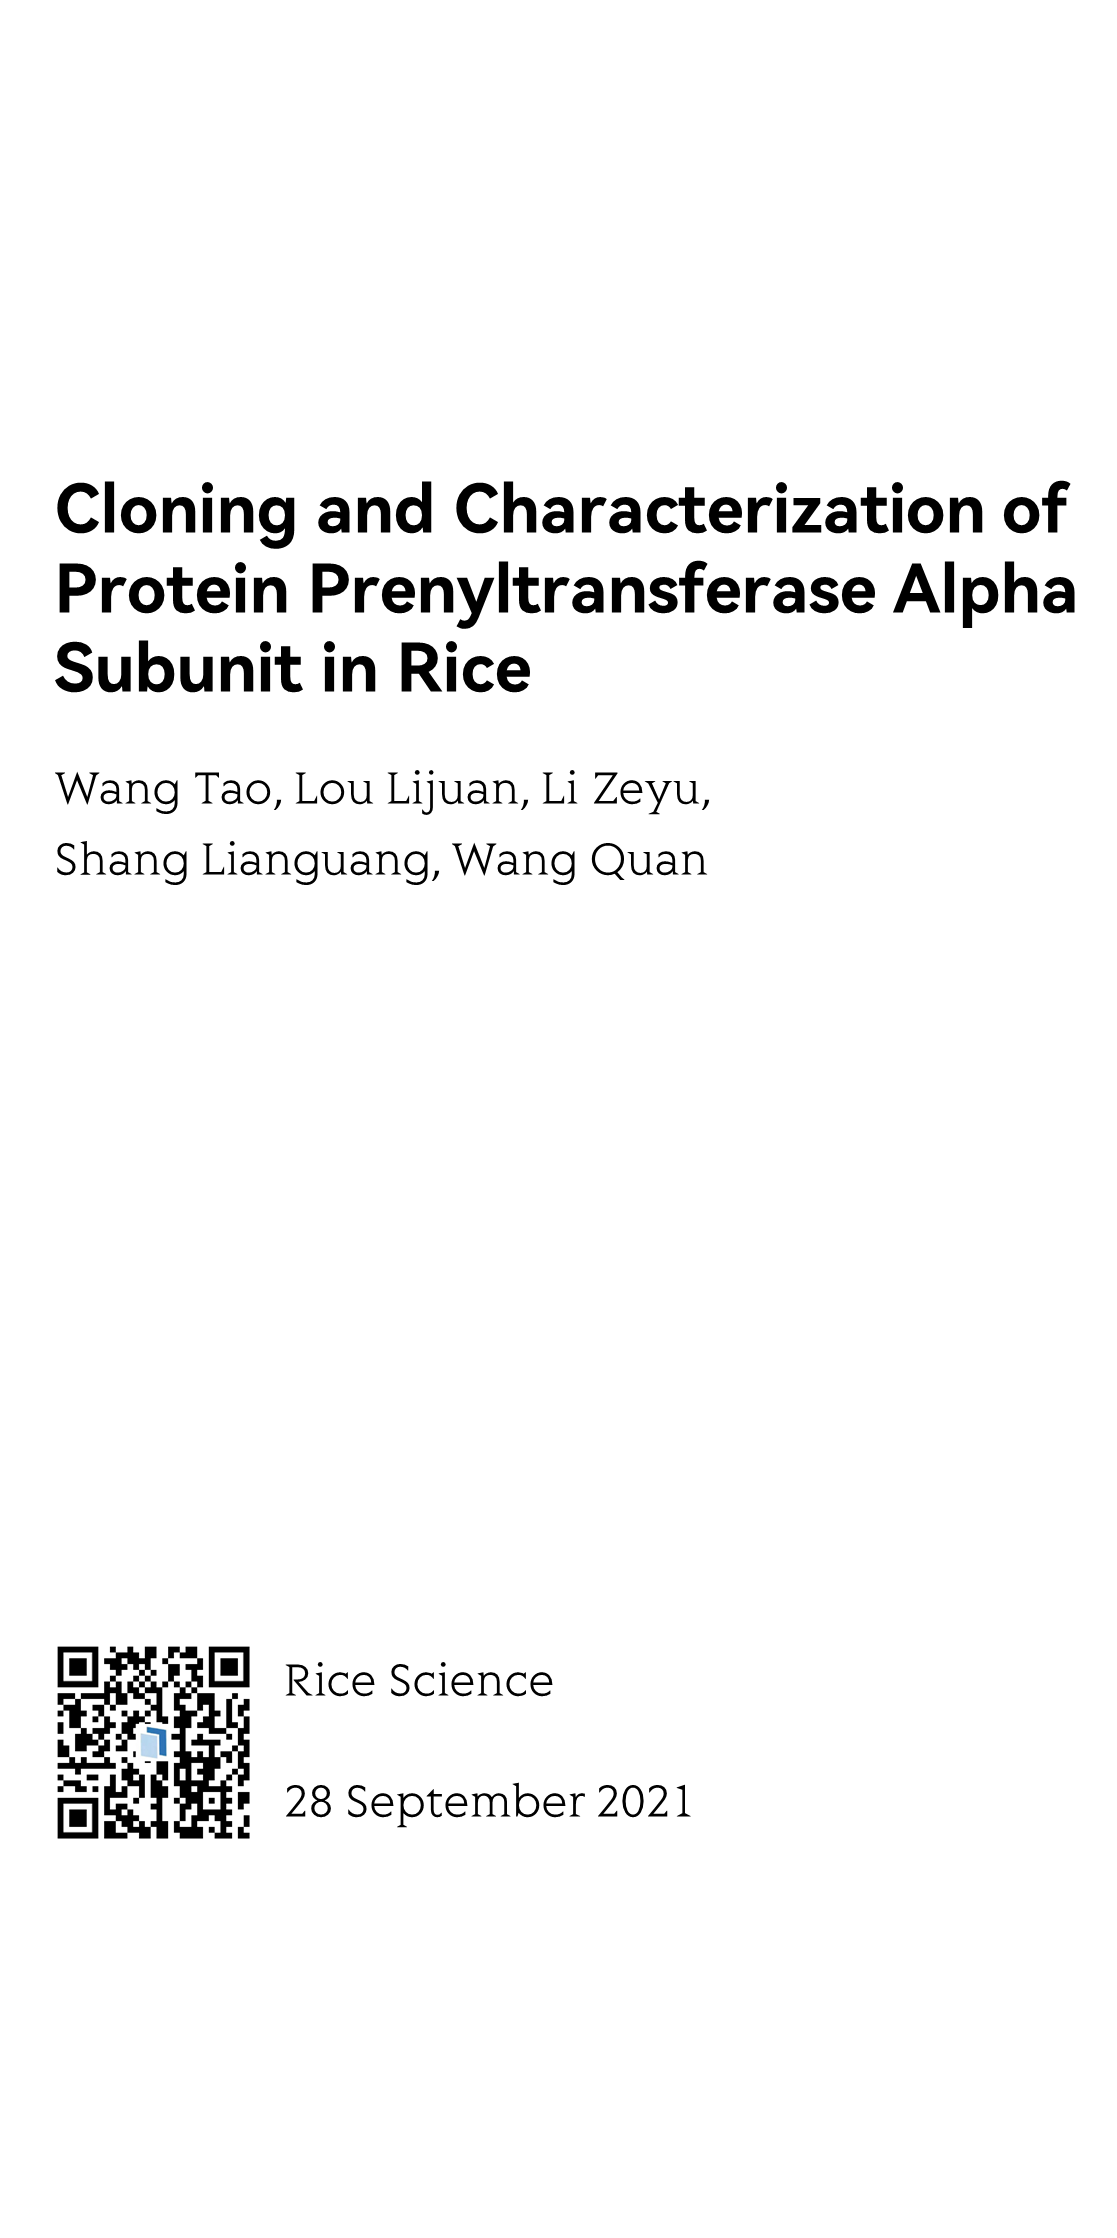 Cloning and Characterization of Protein Prenyltransferase Alpha Subunit in Rice_1